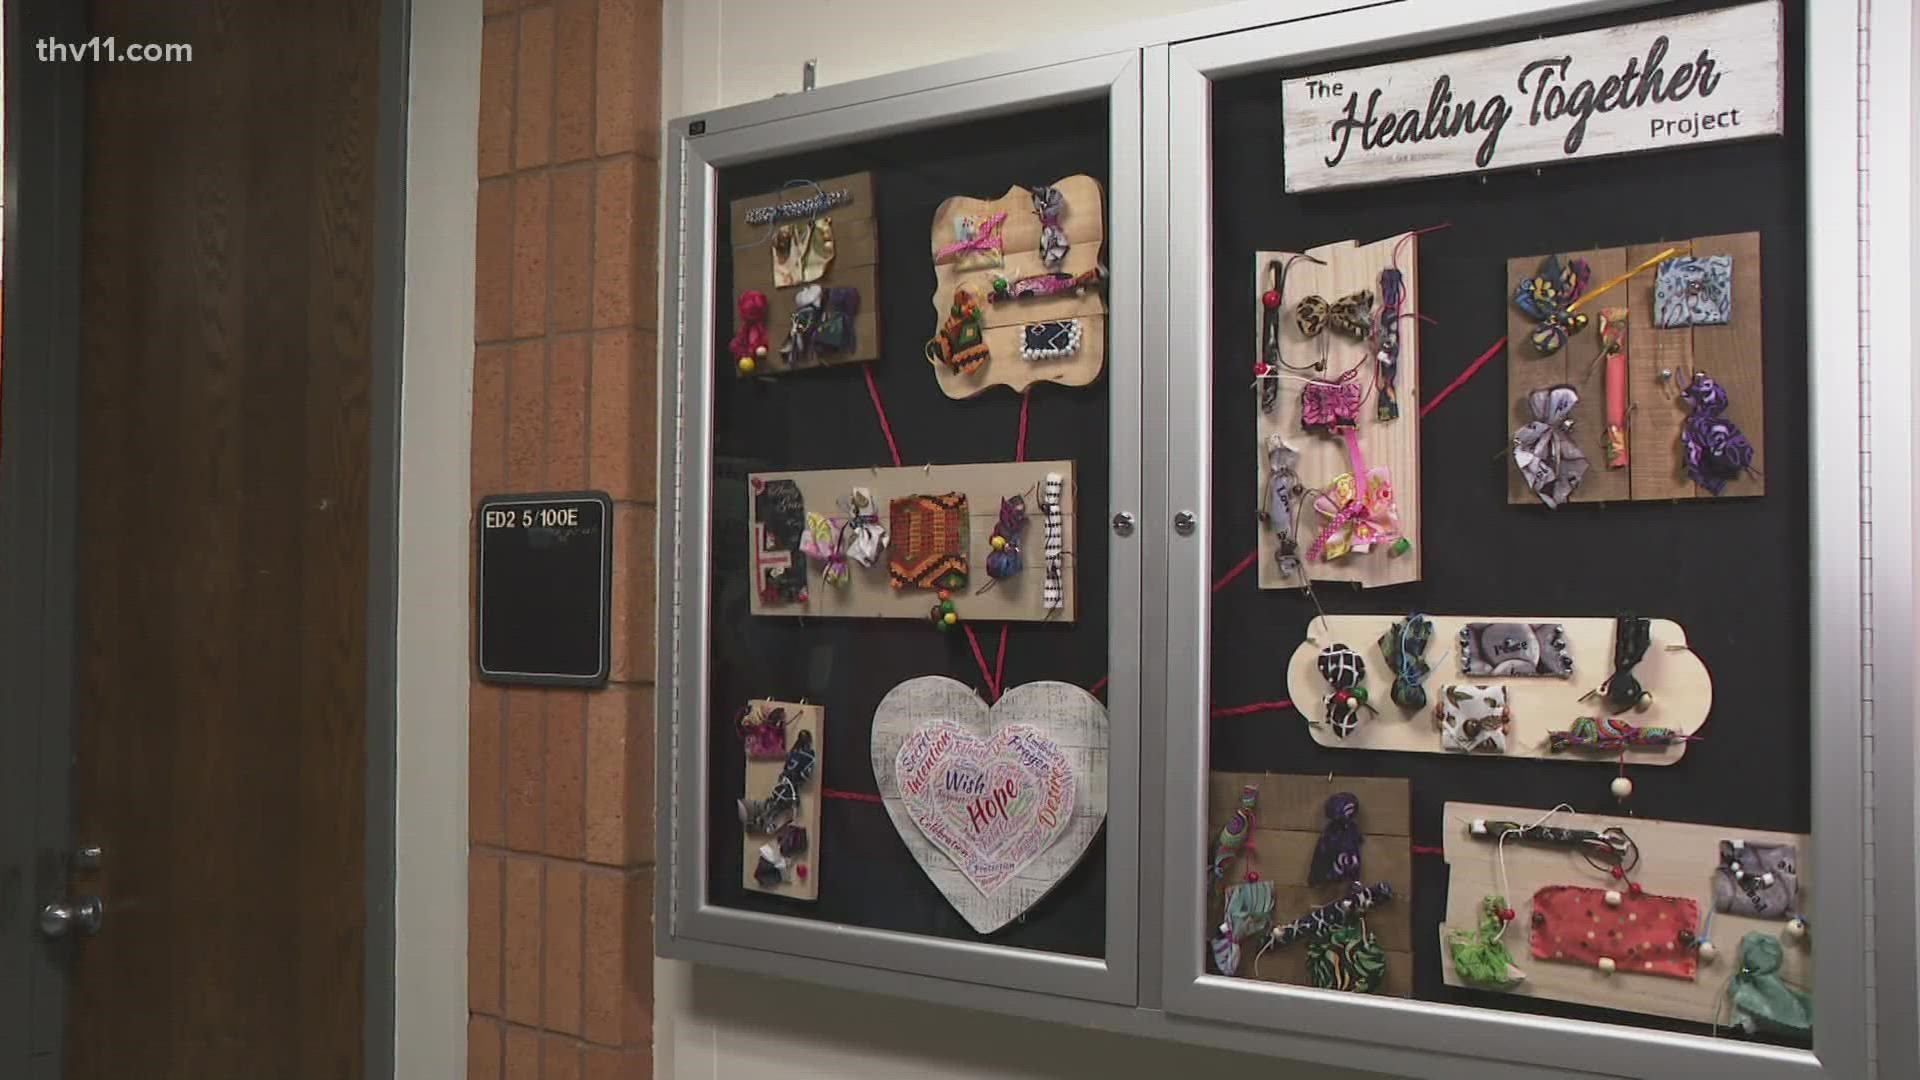 This display at UAMS is inspiring hope for the future.
The Healing Together project started in the College of Nursing and was inspired by a Crystal Bridges exhibit.